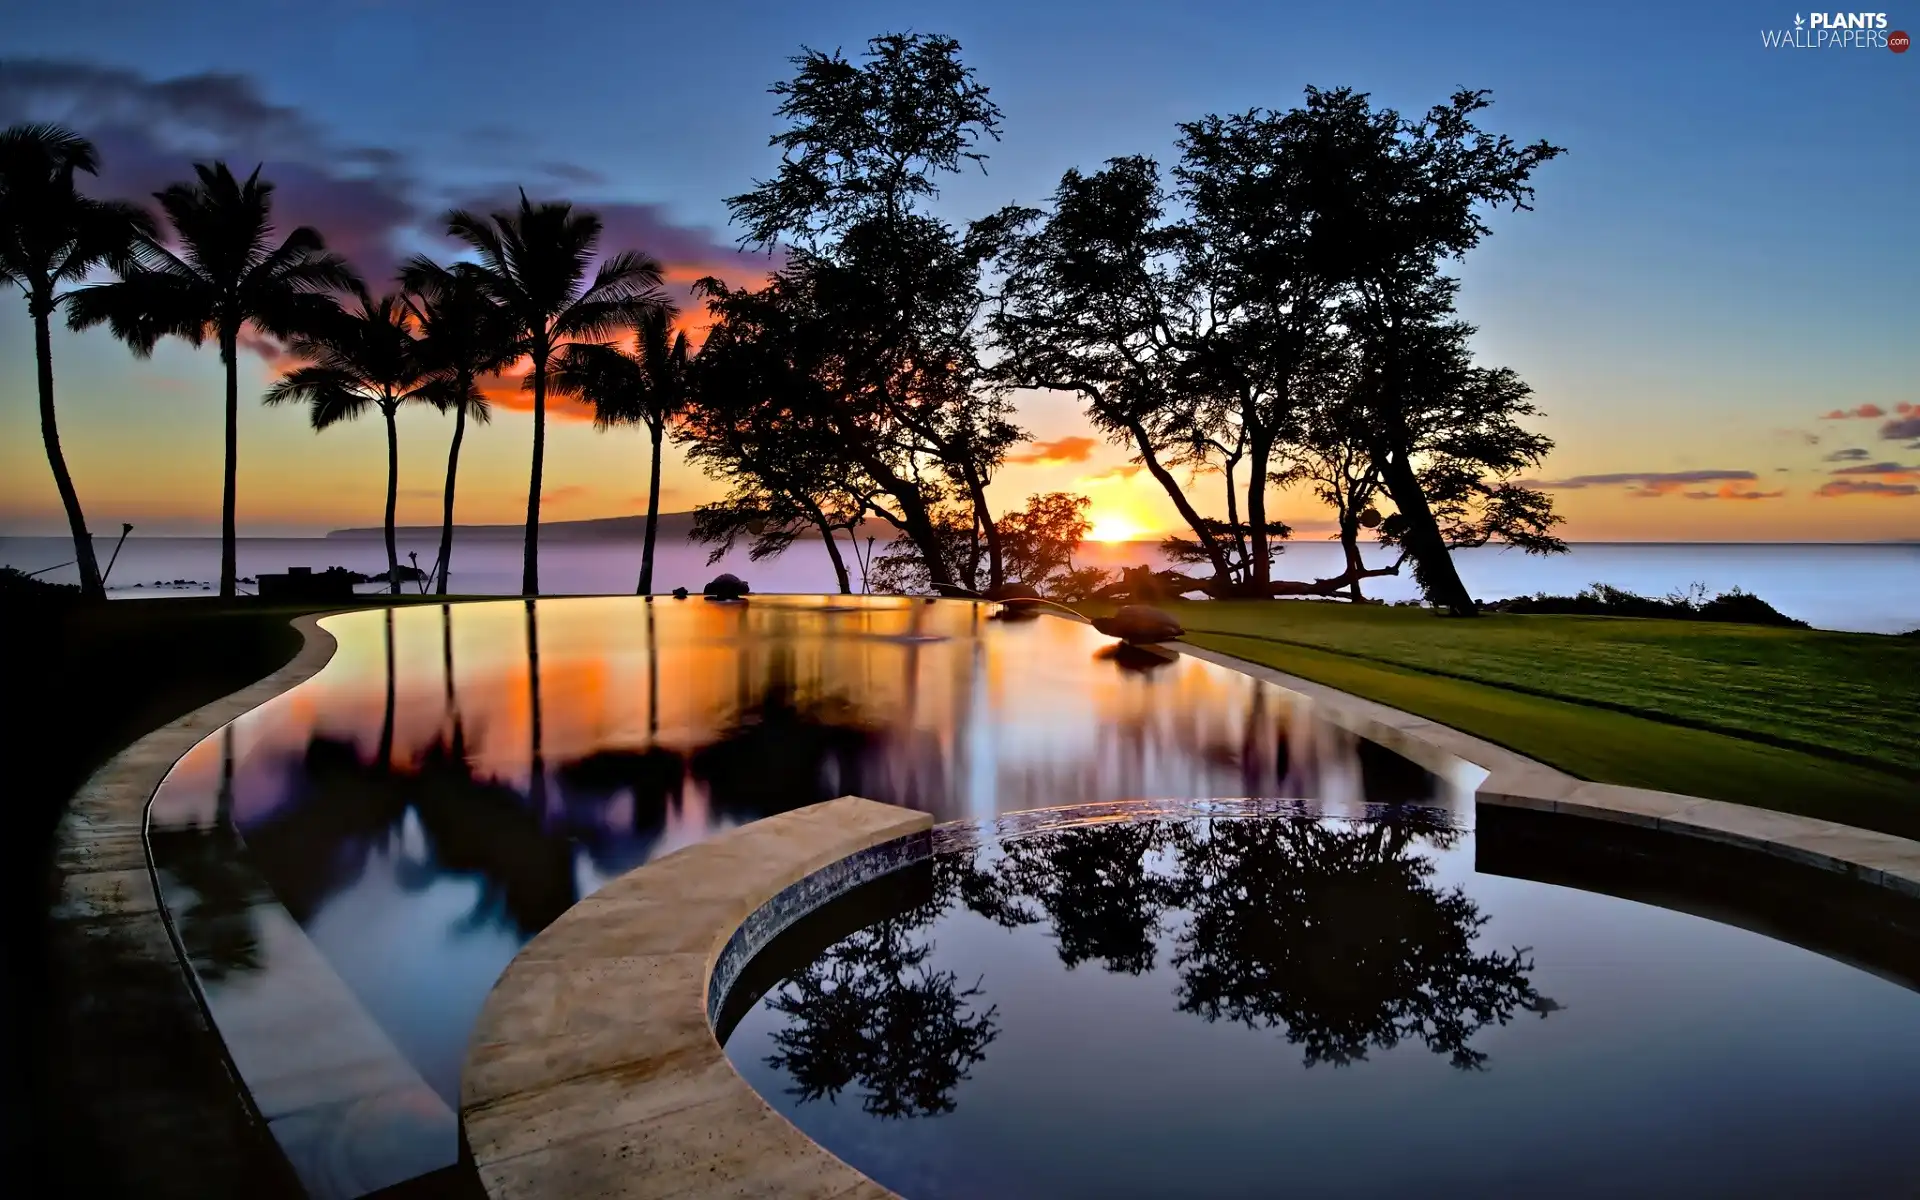 viewes, Palms, Great Sunsets, trees, Pool